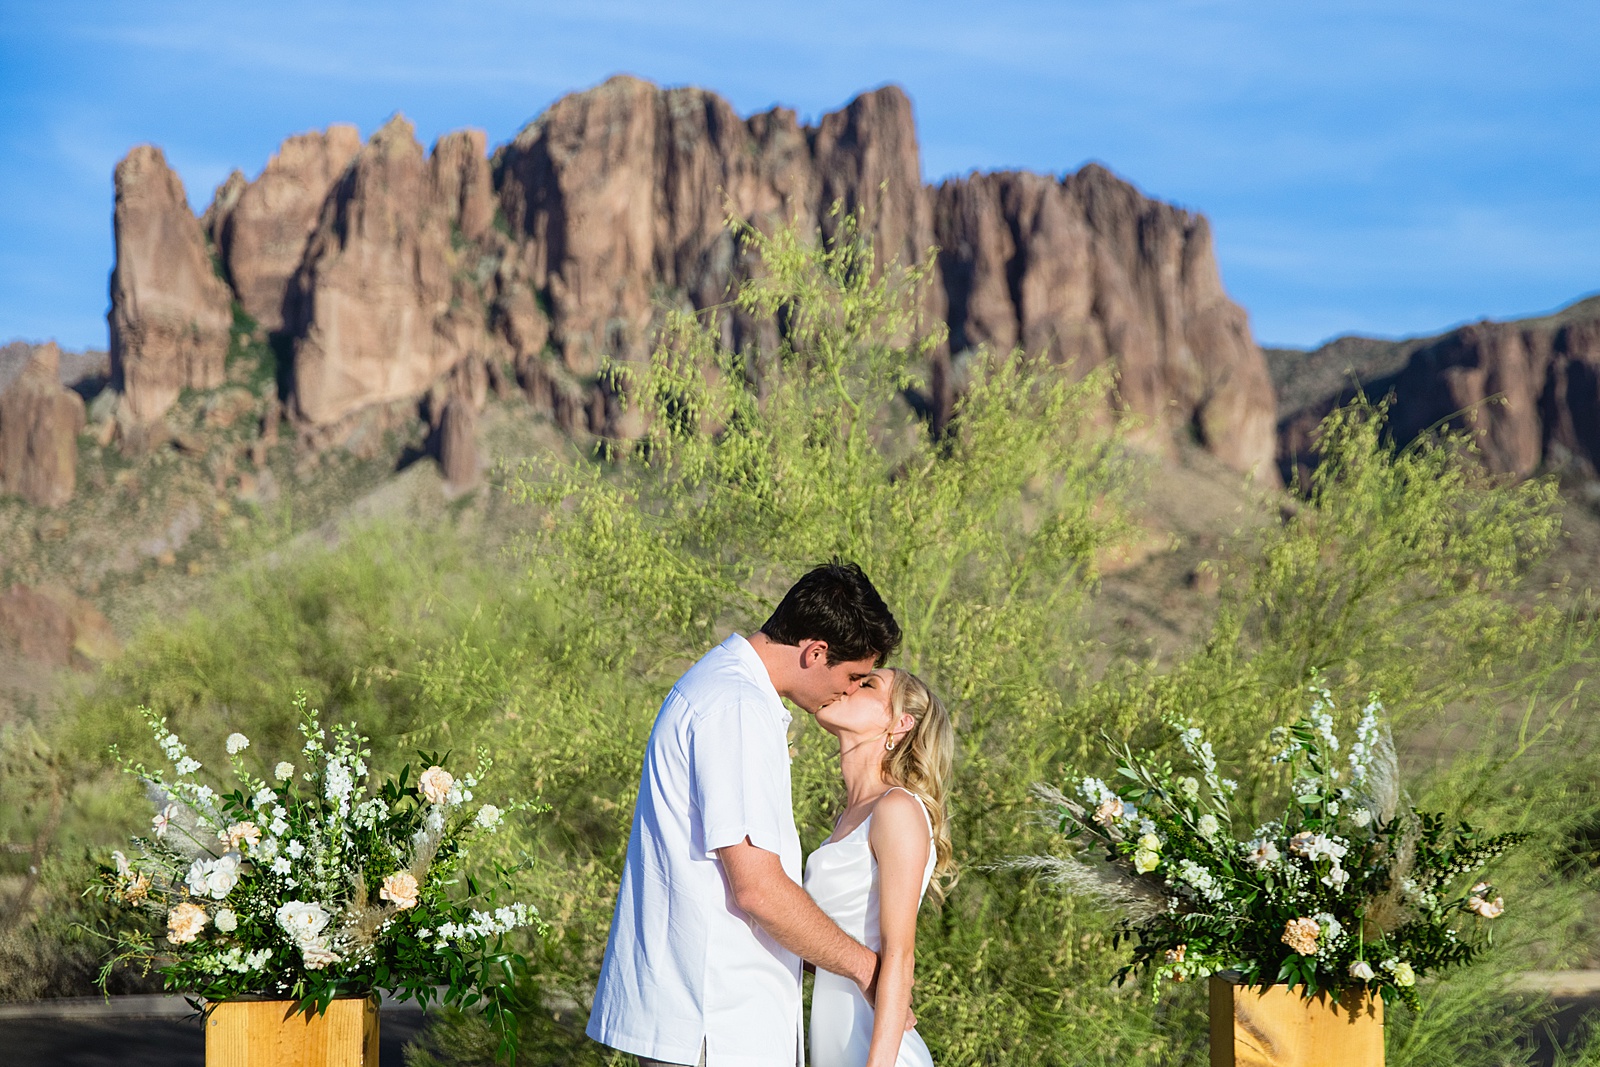 Bride and Groom share a kiss during their Superstition Mountain Micro wedding by Lost Dutchman wedding photographer PMA Photography.